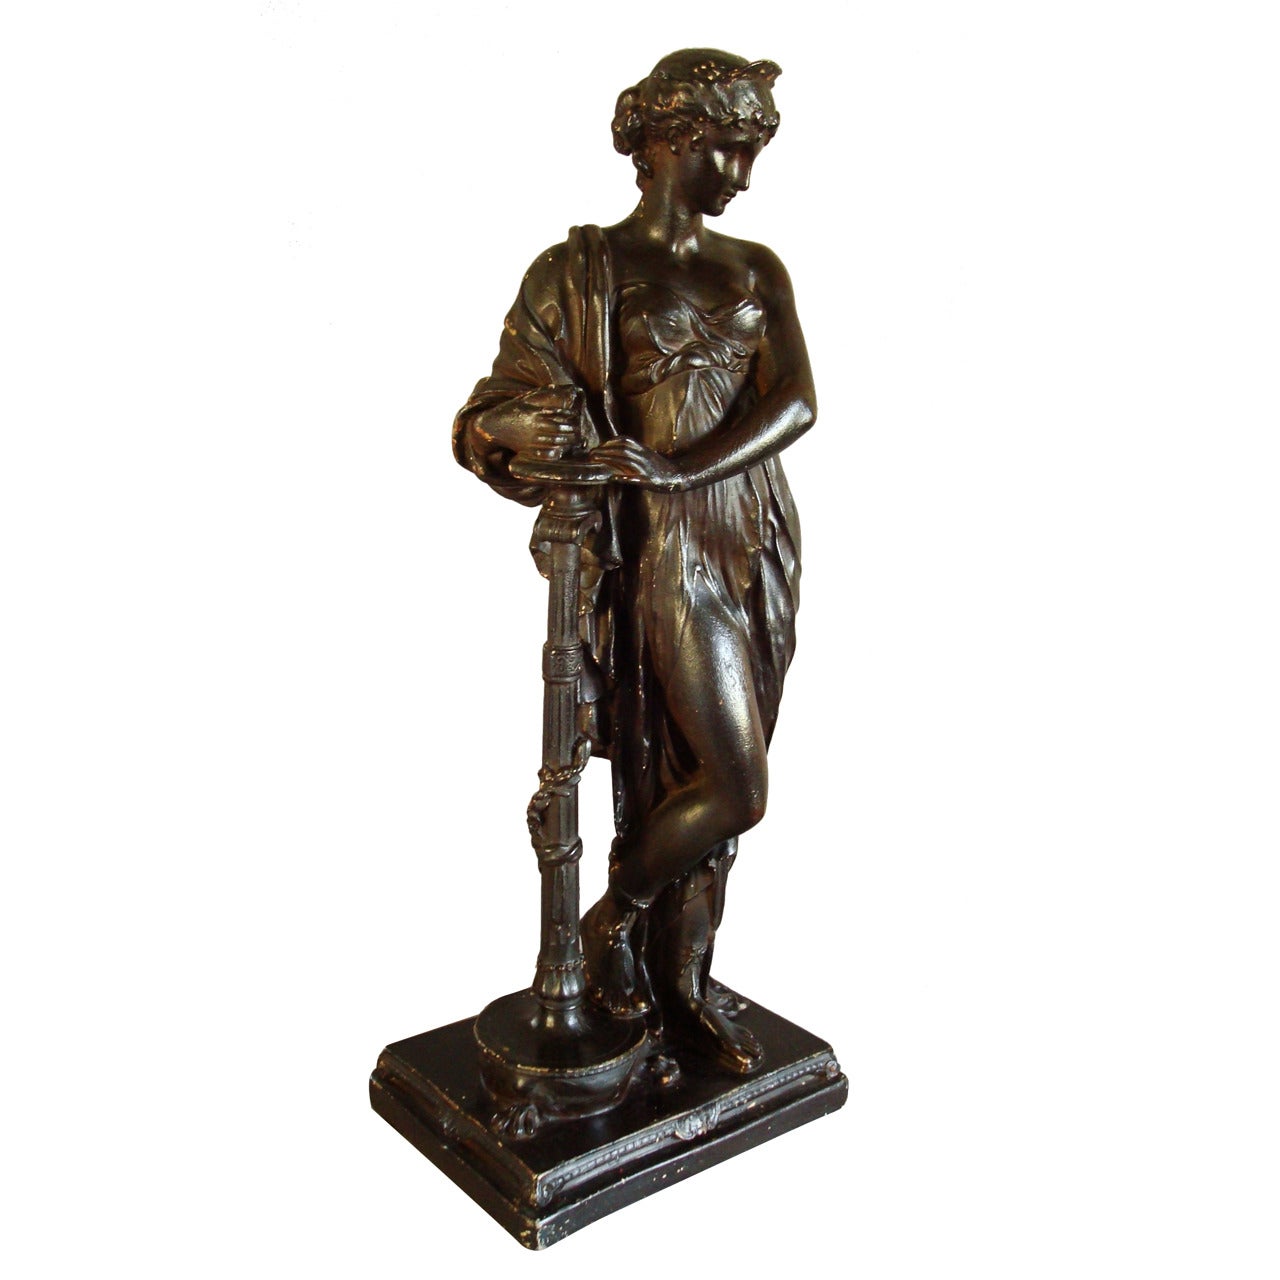 Regency 'Bronzed' Sculpture of a Classical Figure For Sale